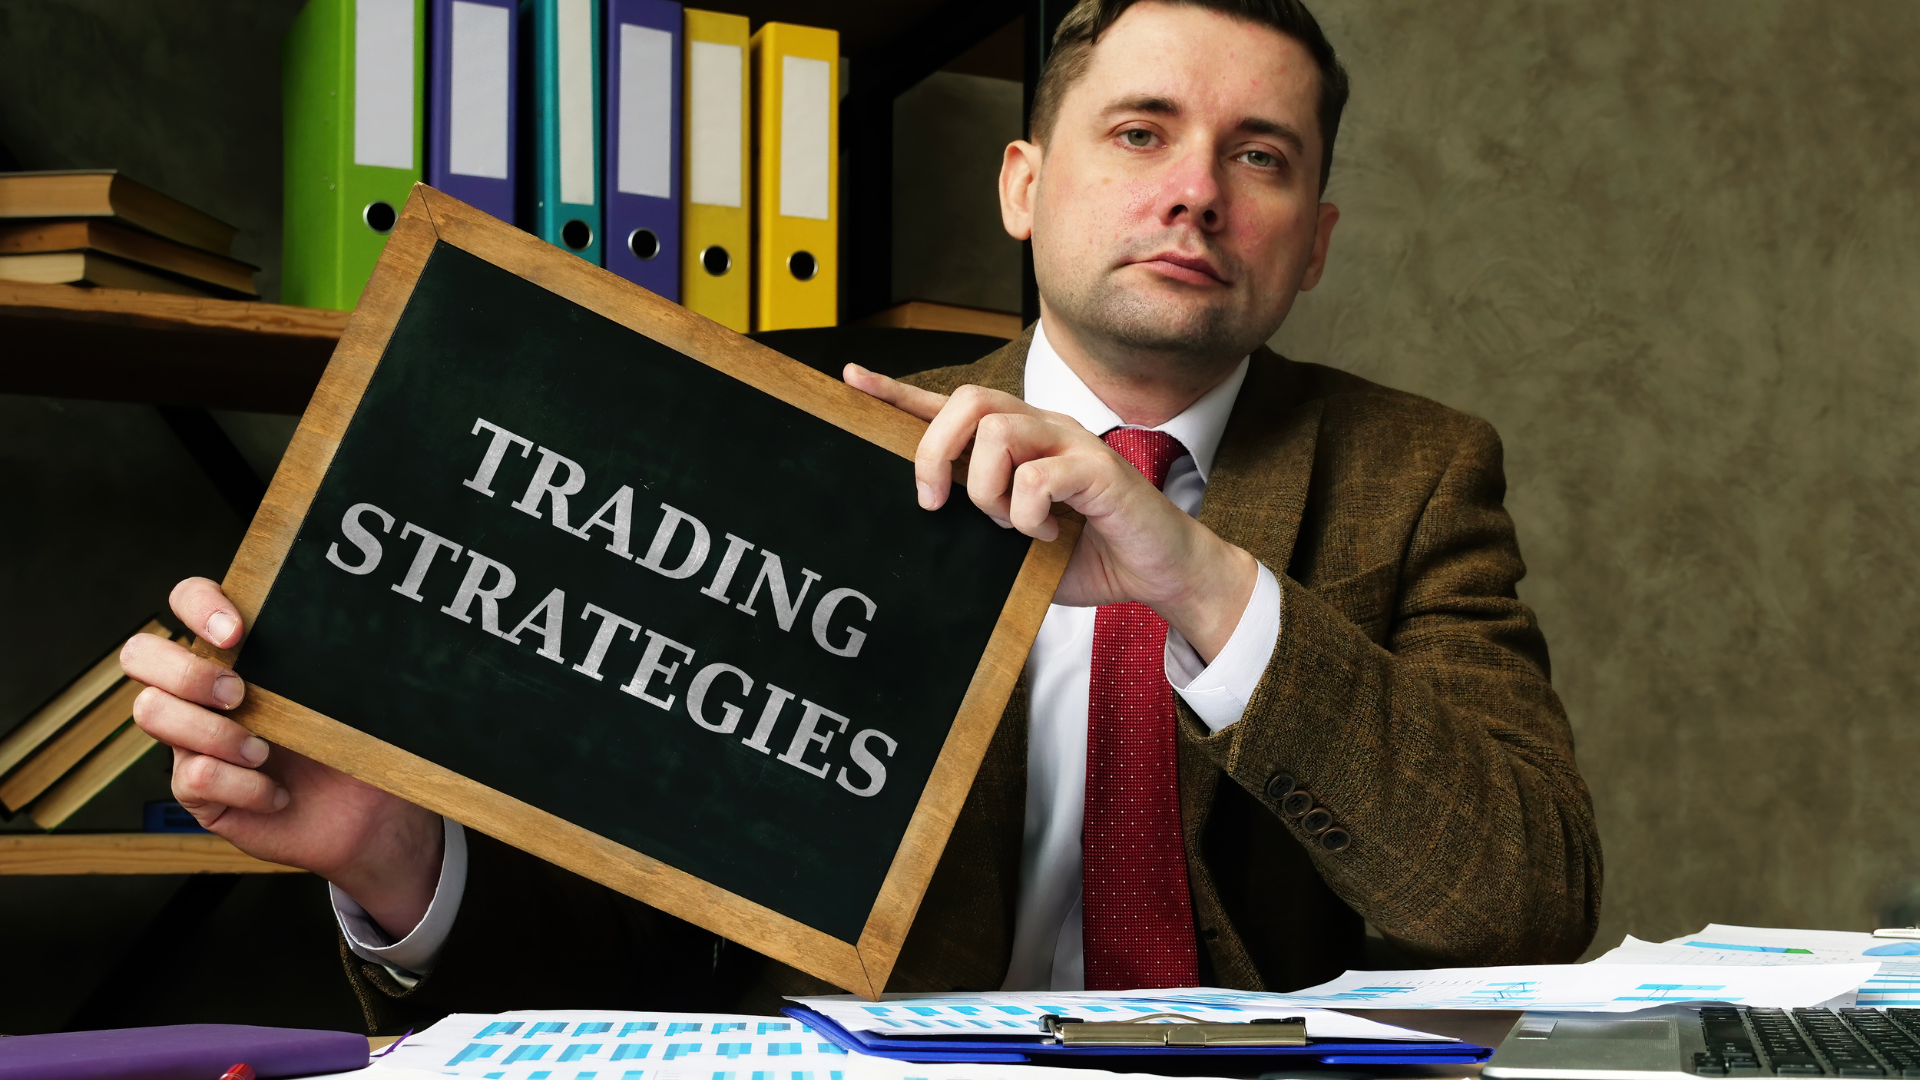 Trading Strategies: When To Buy And Sell